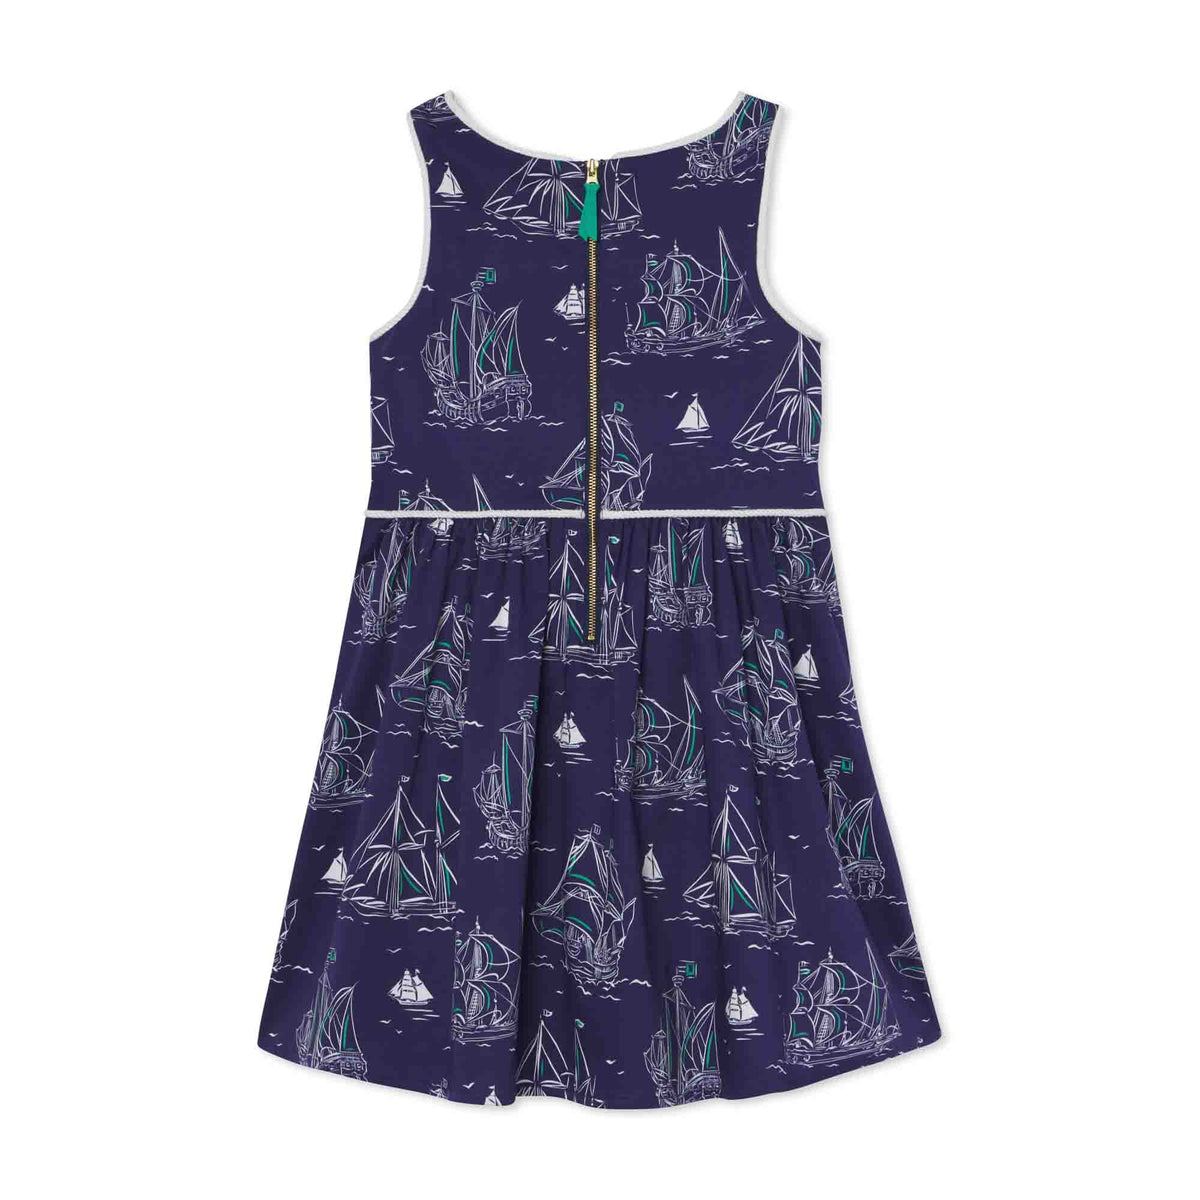 Classic and Preppy Charlotte Dress, Commodore Print-Dresses, Jumpsuits and Rompers-CPC - Classic Prep Childrenswear